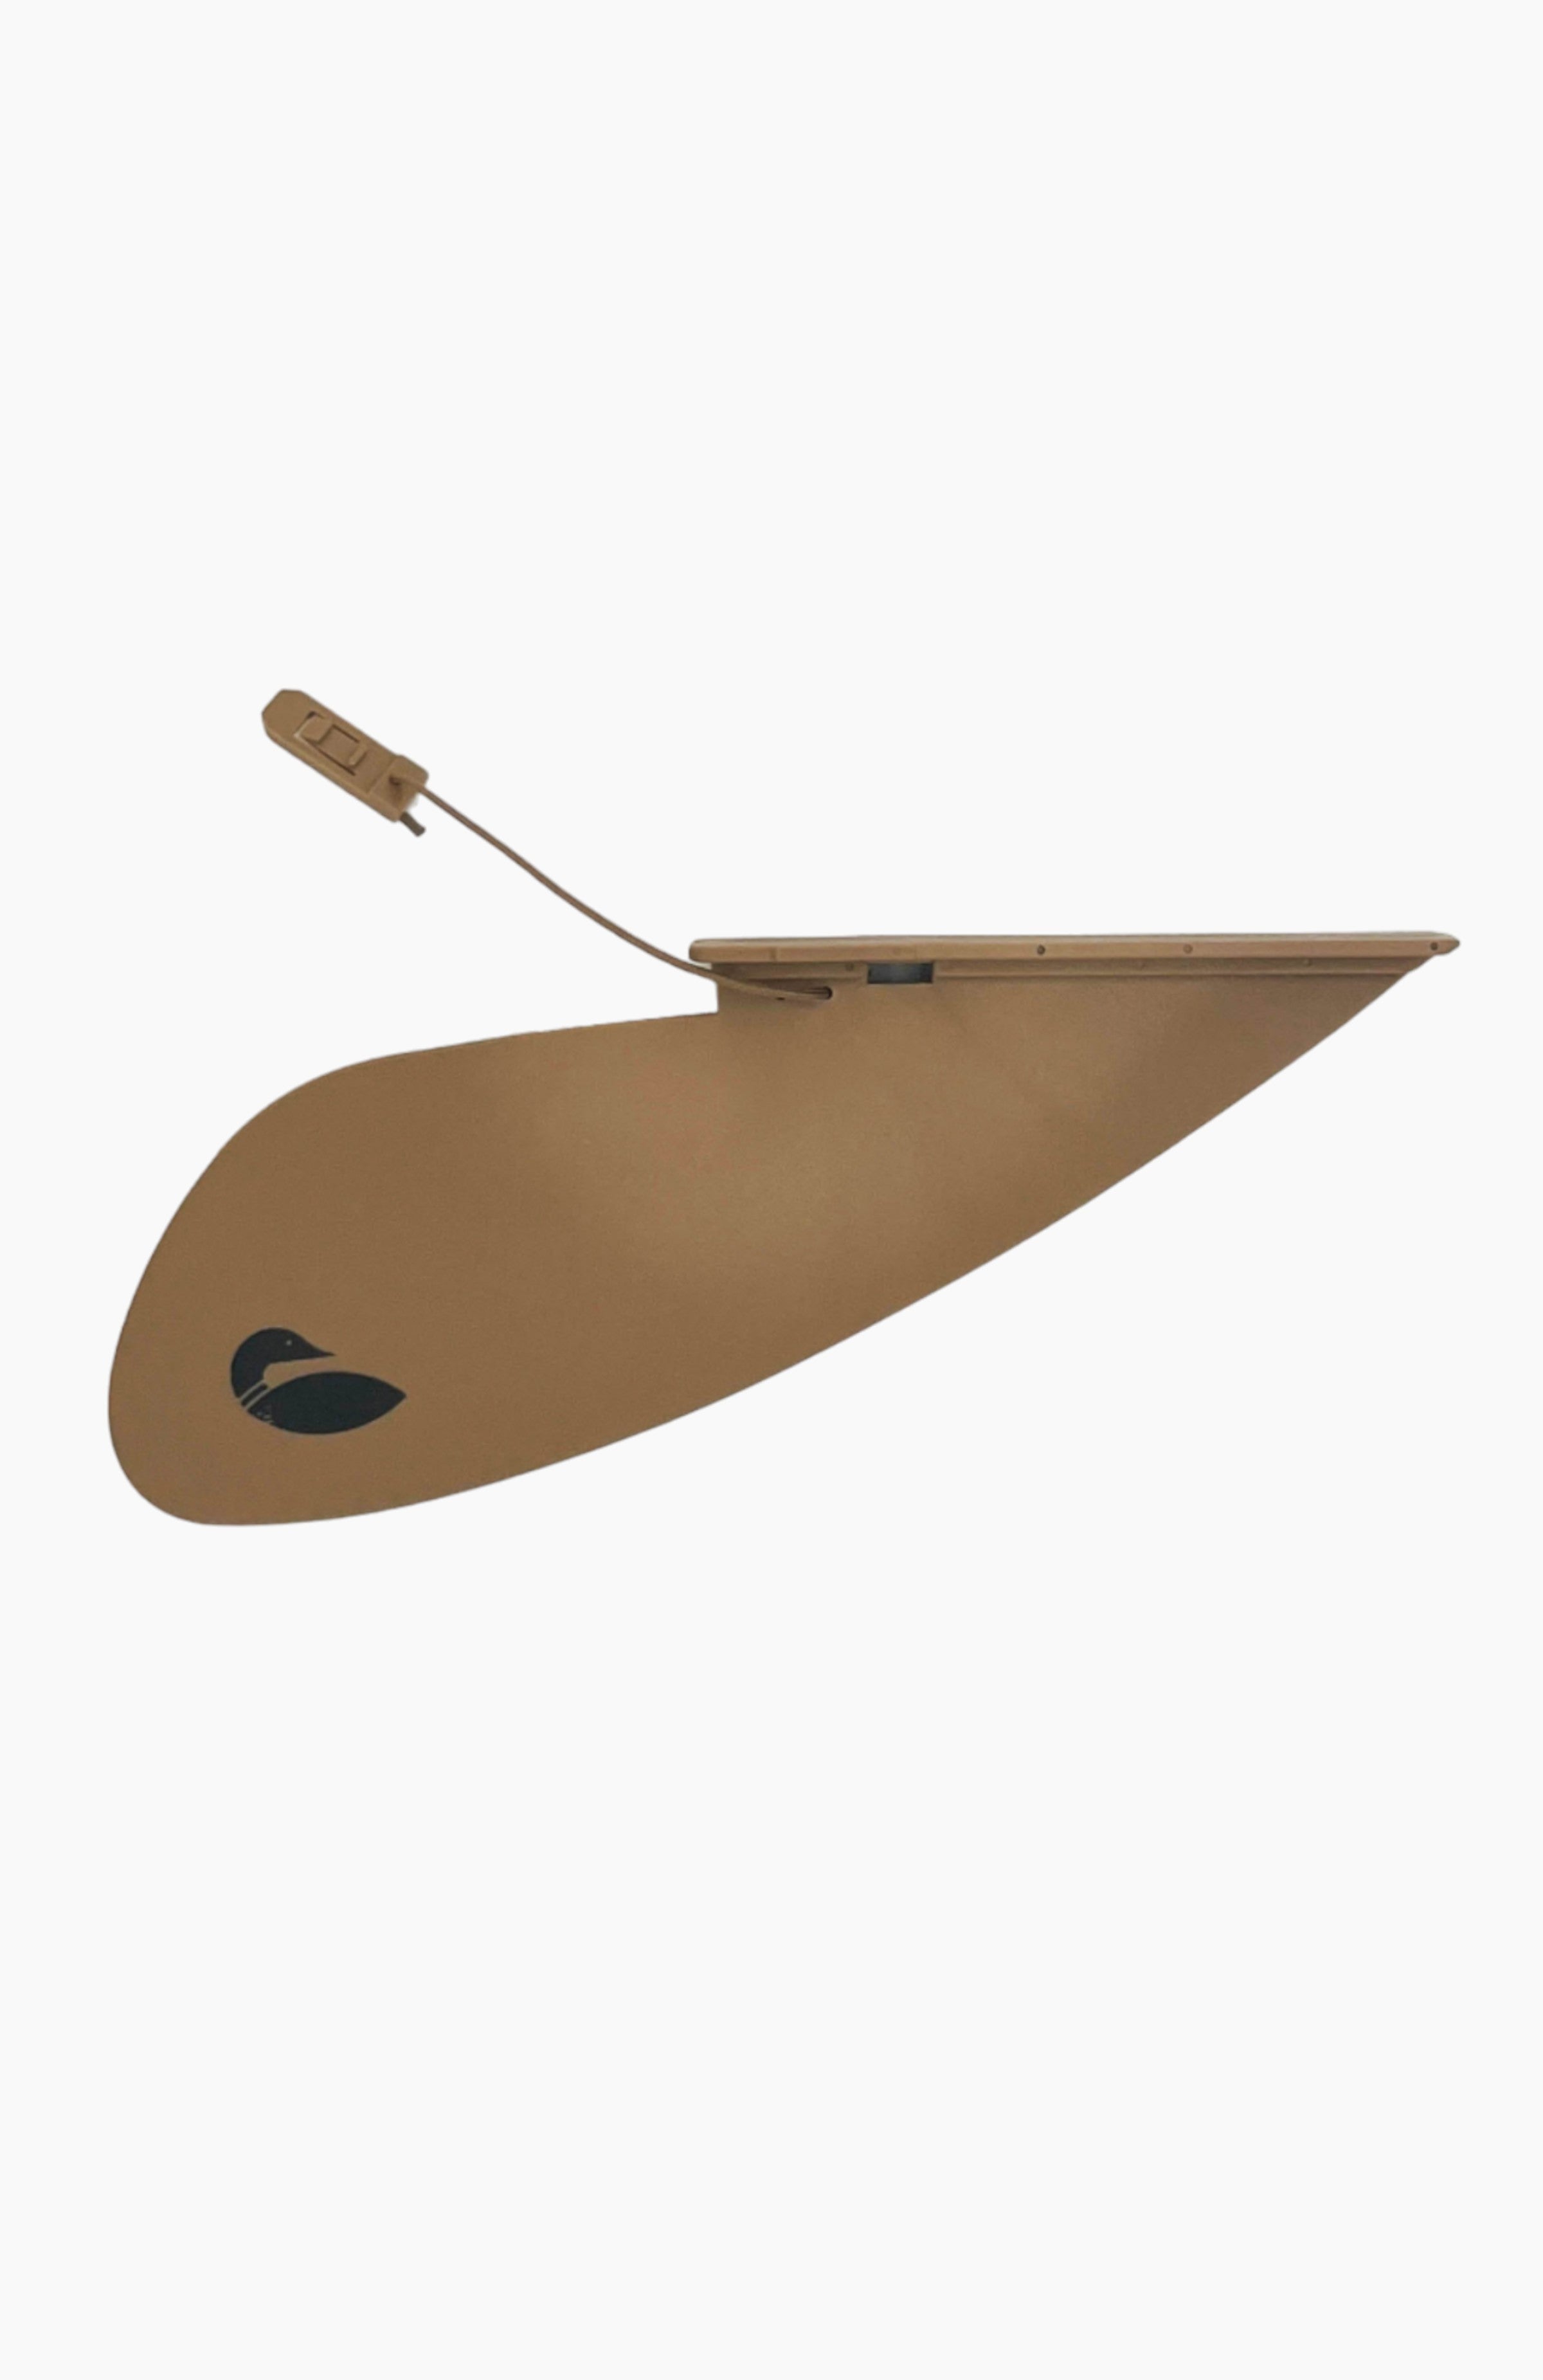 Paddle board accessories: tan detachable shallow water fin for paddle boards.